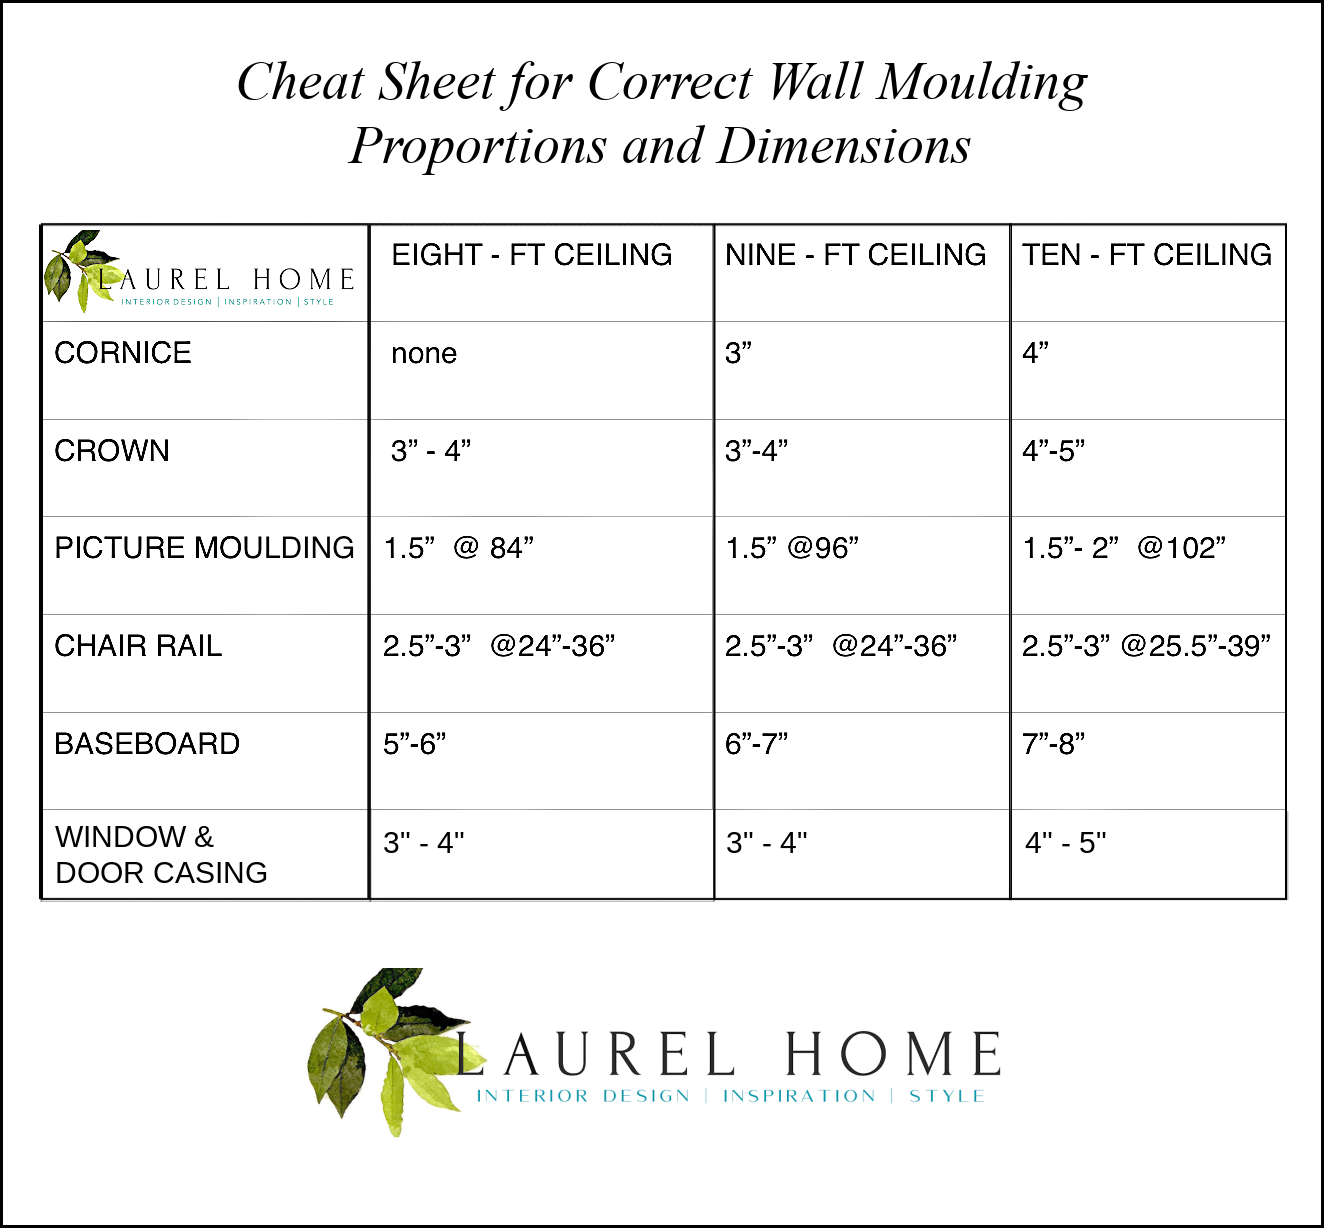 Cheat Sheet for Best Wall Moulding Proportions & Dimensions